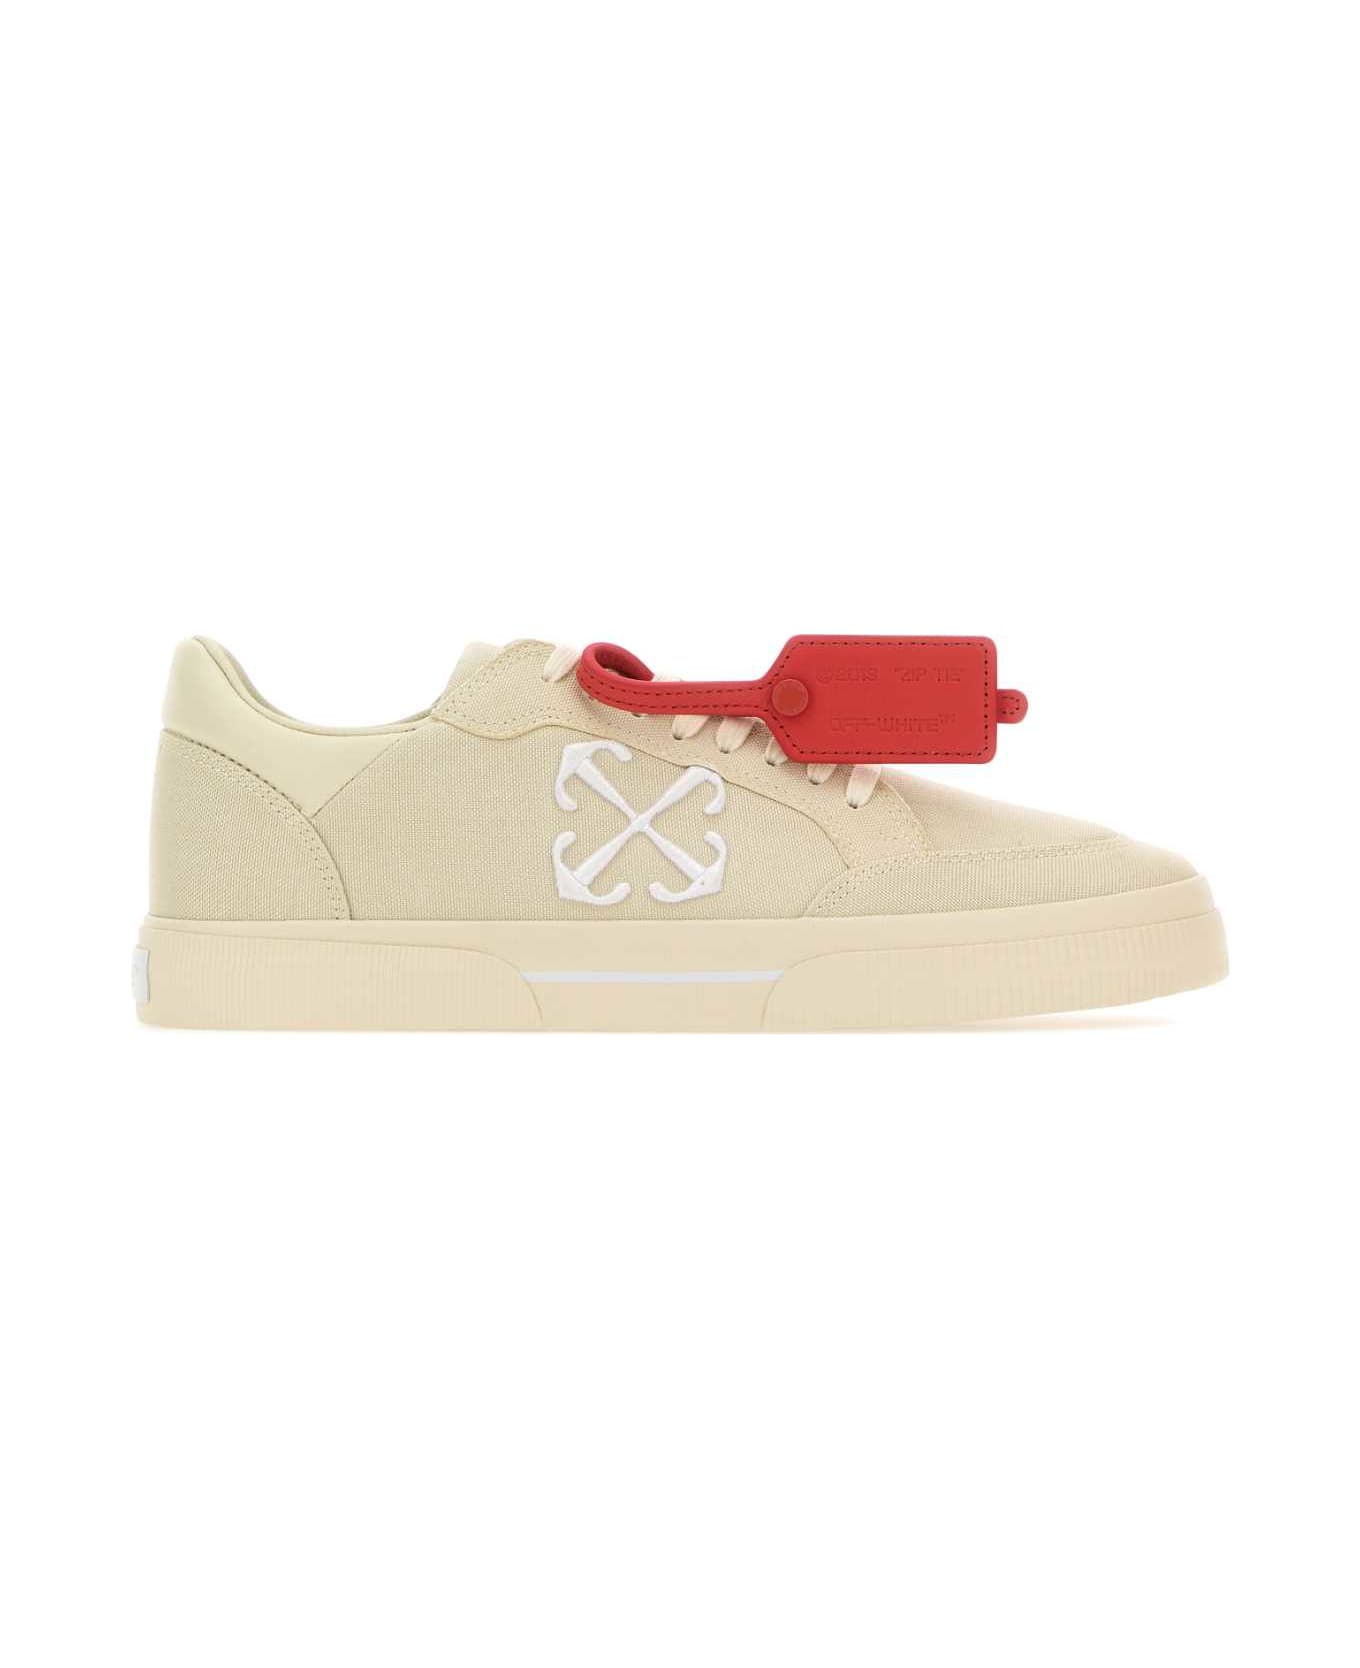 Off-White New Low Vulcanized Sneakers - 0301 スニーカー